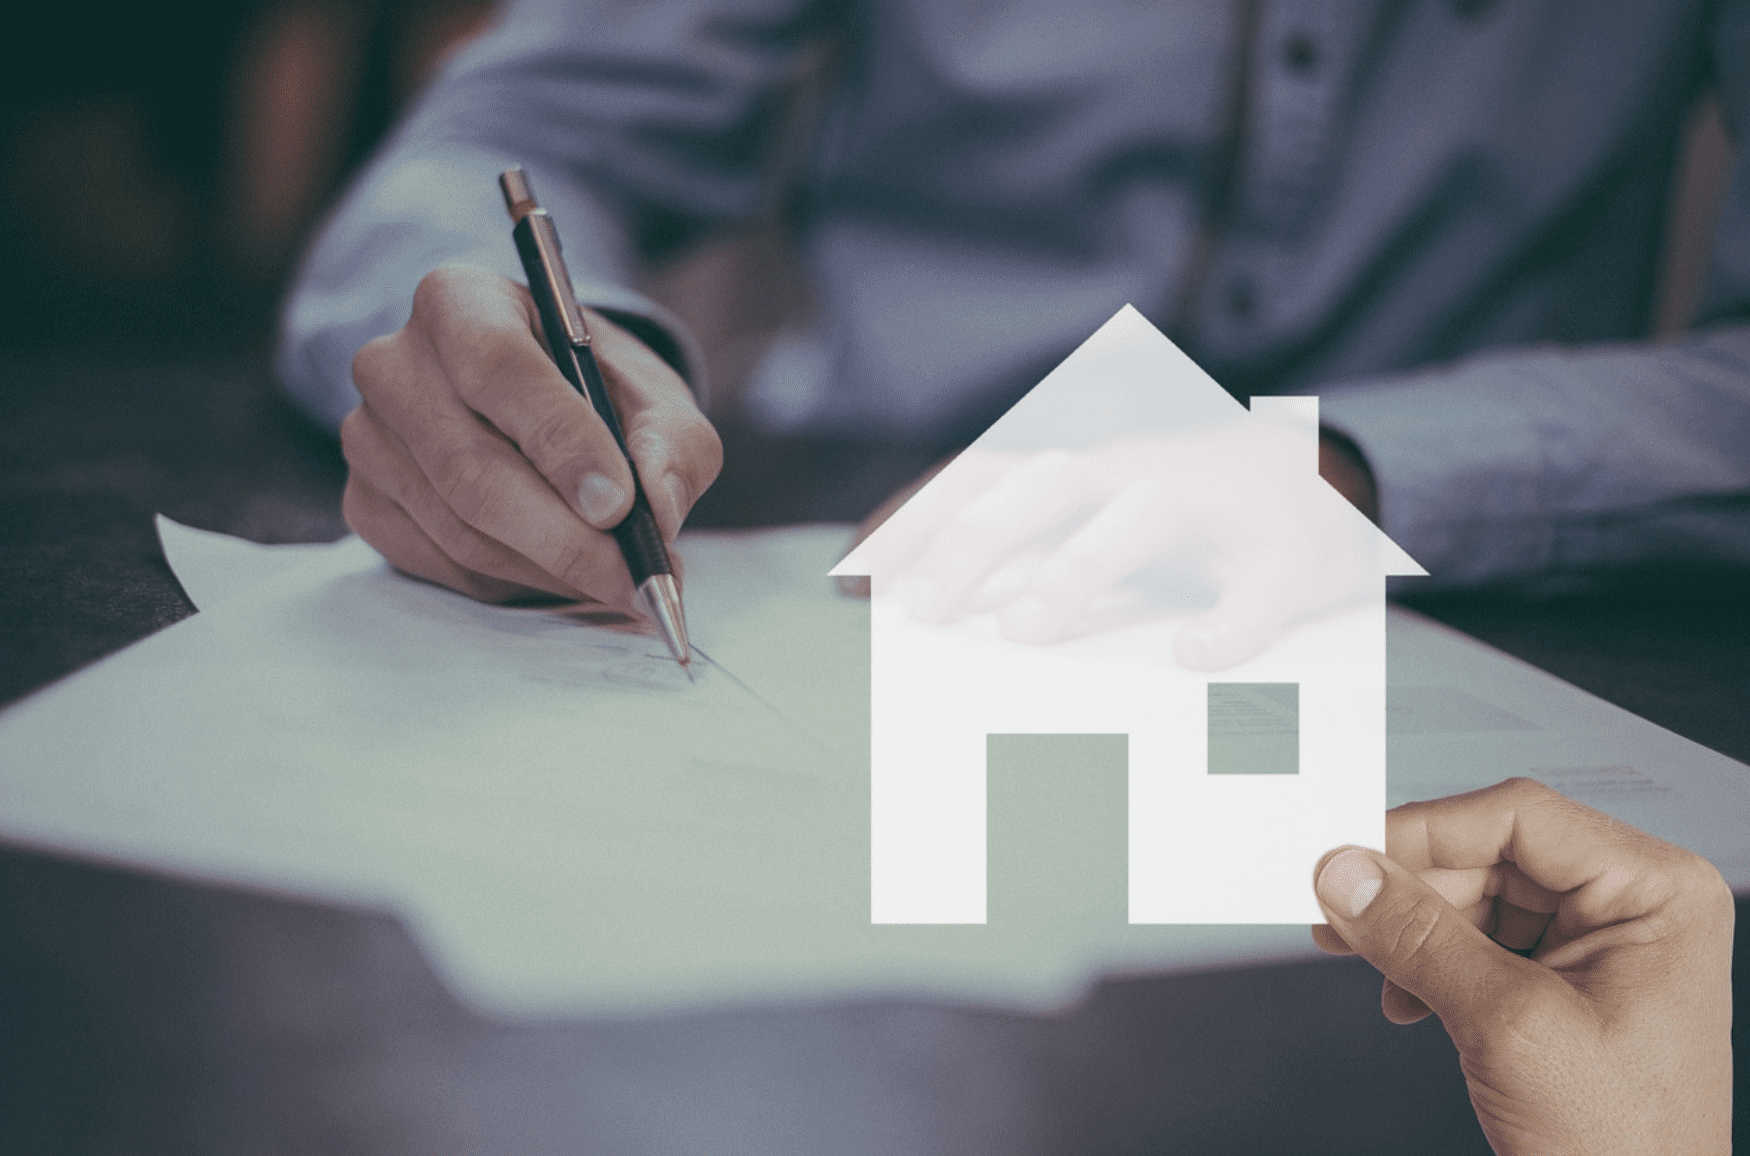 Are Property Tax Loans a Good Idea? | Home Tax Solutions